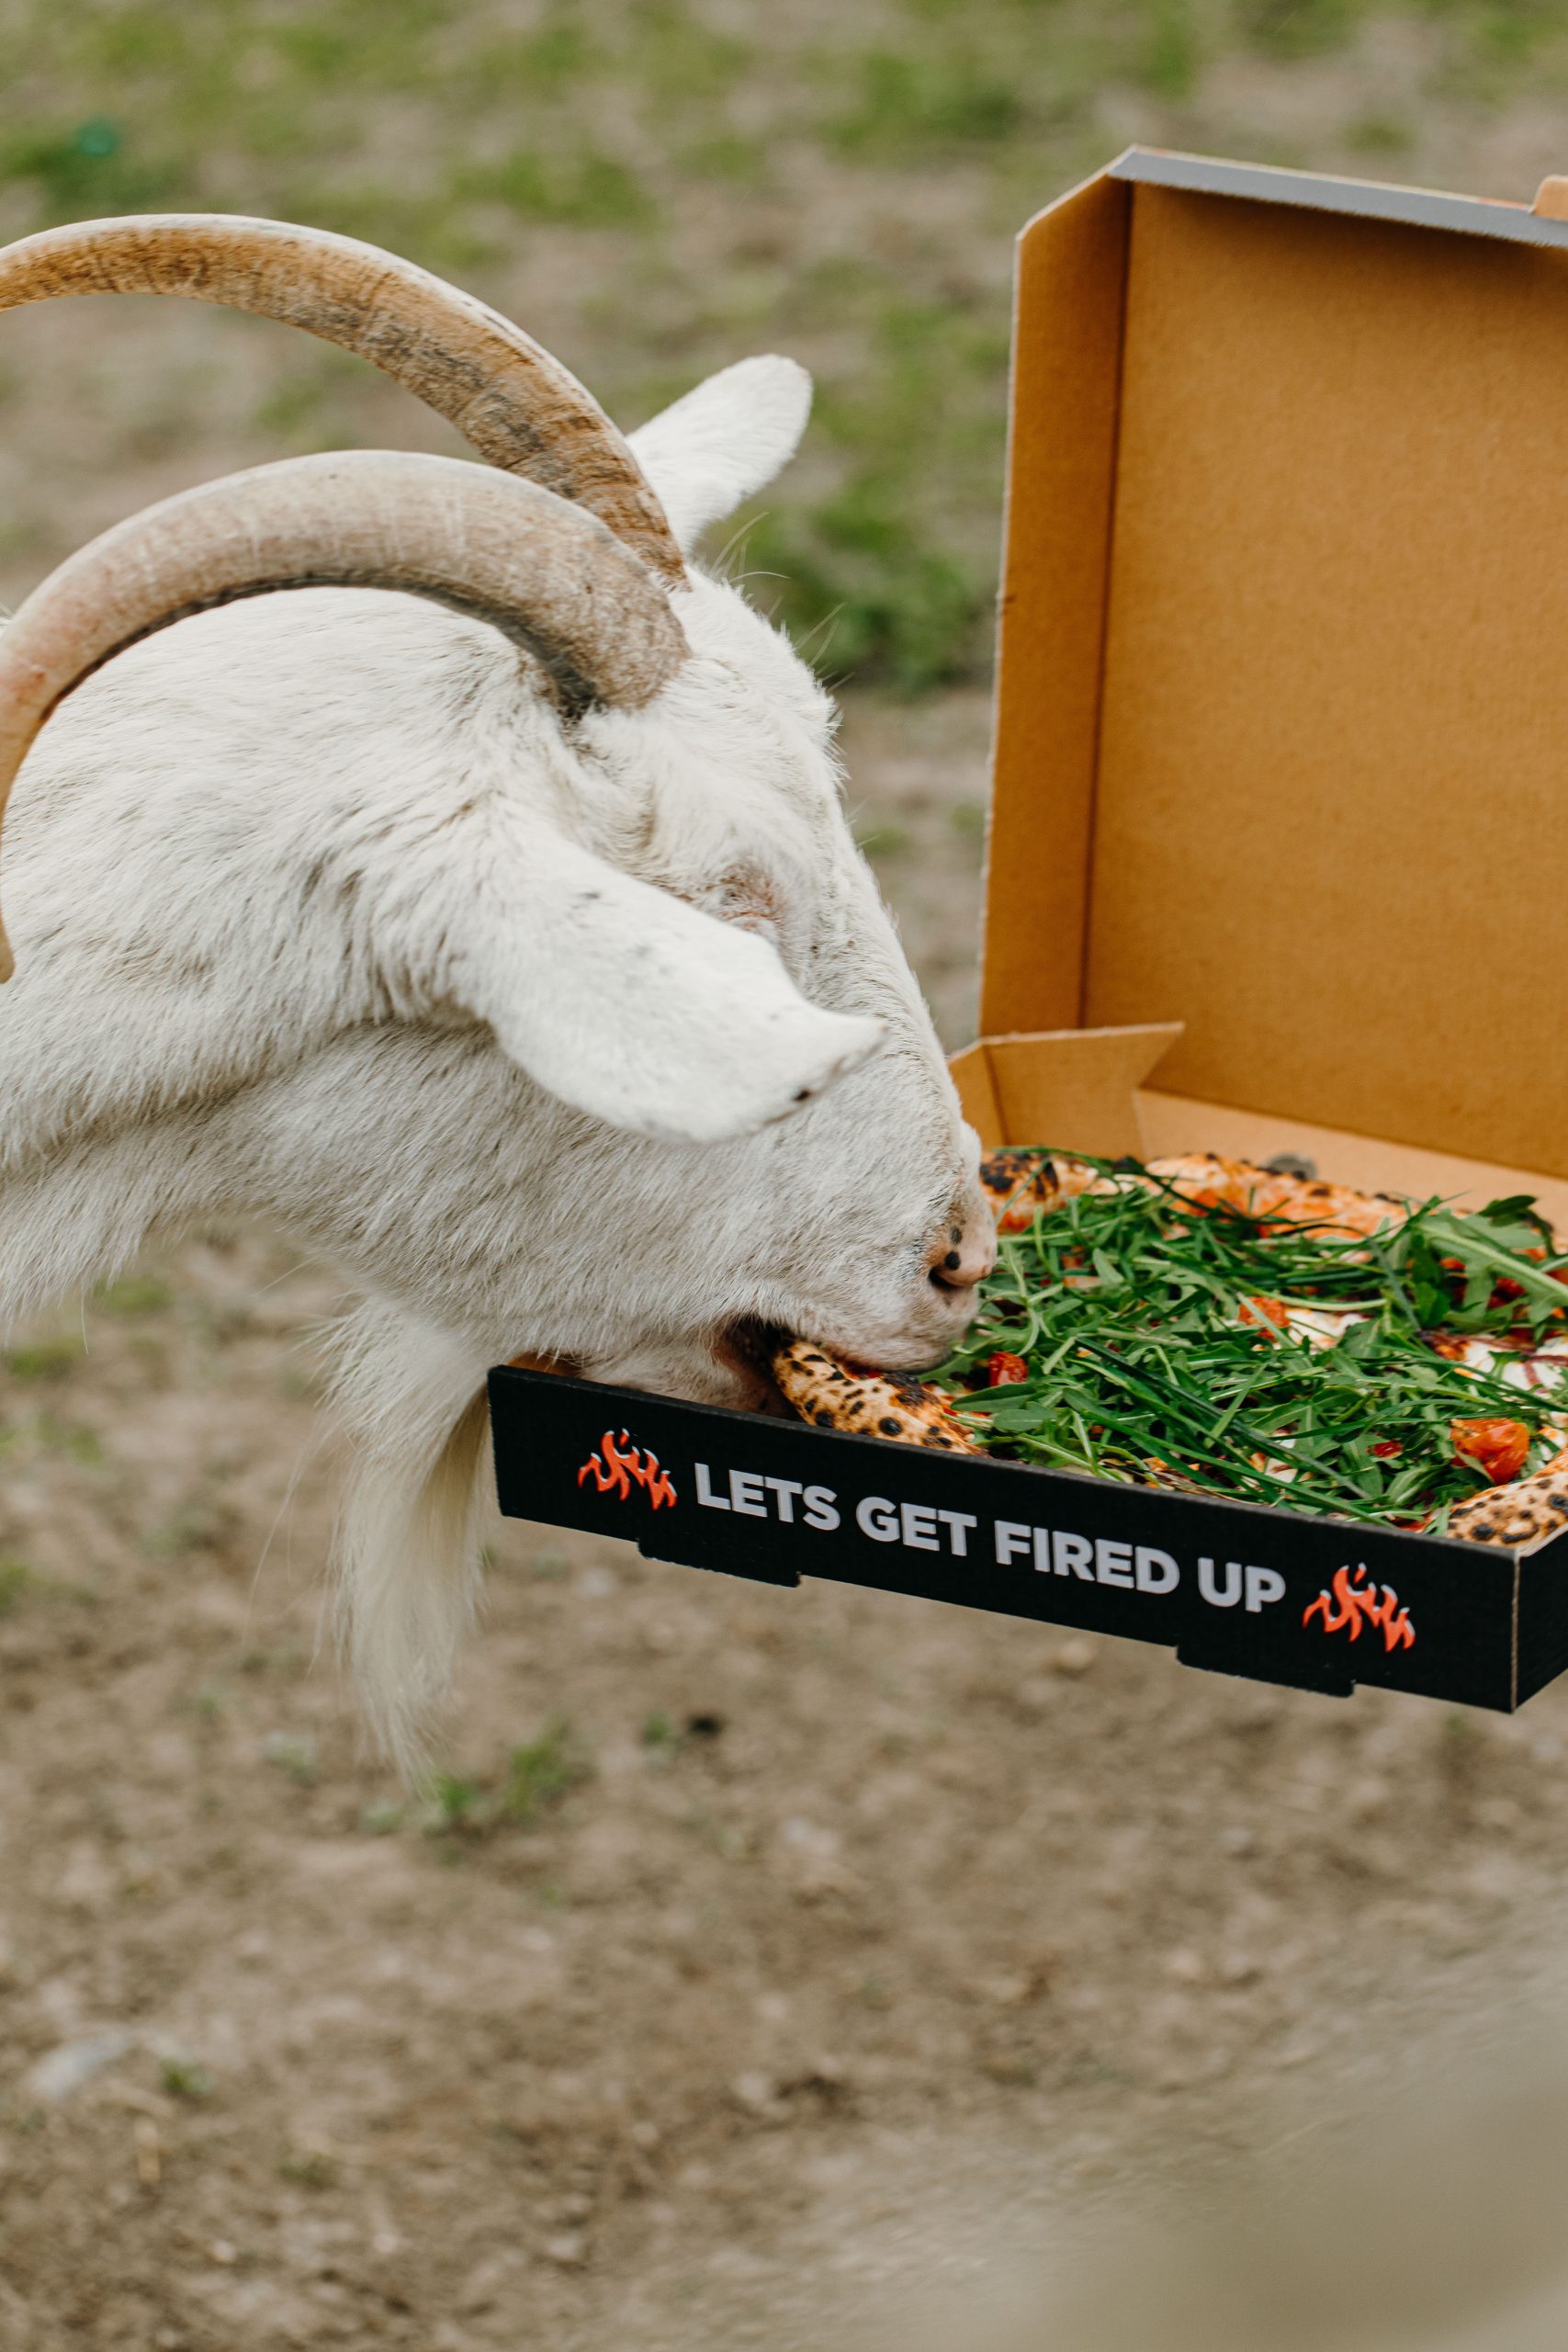 Fired up pizza being eaten by a goat